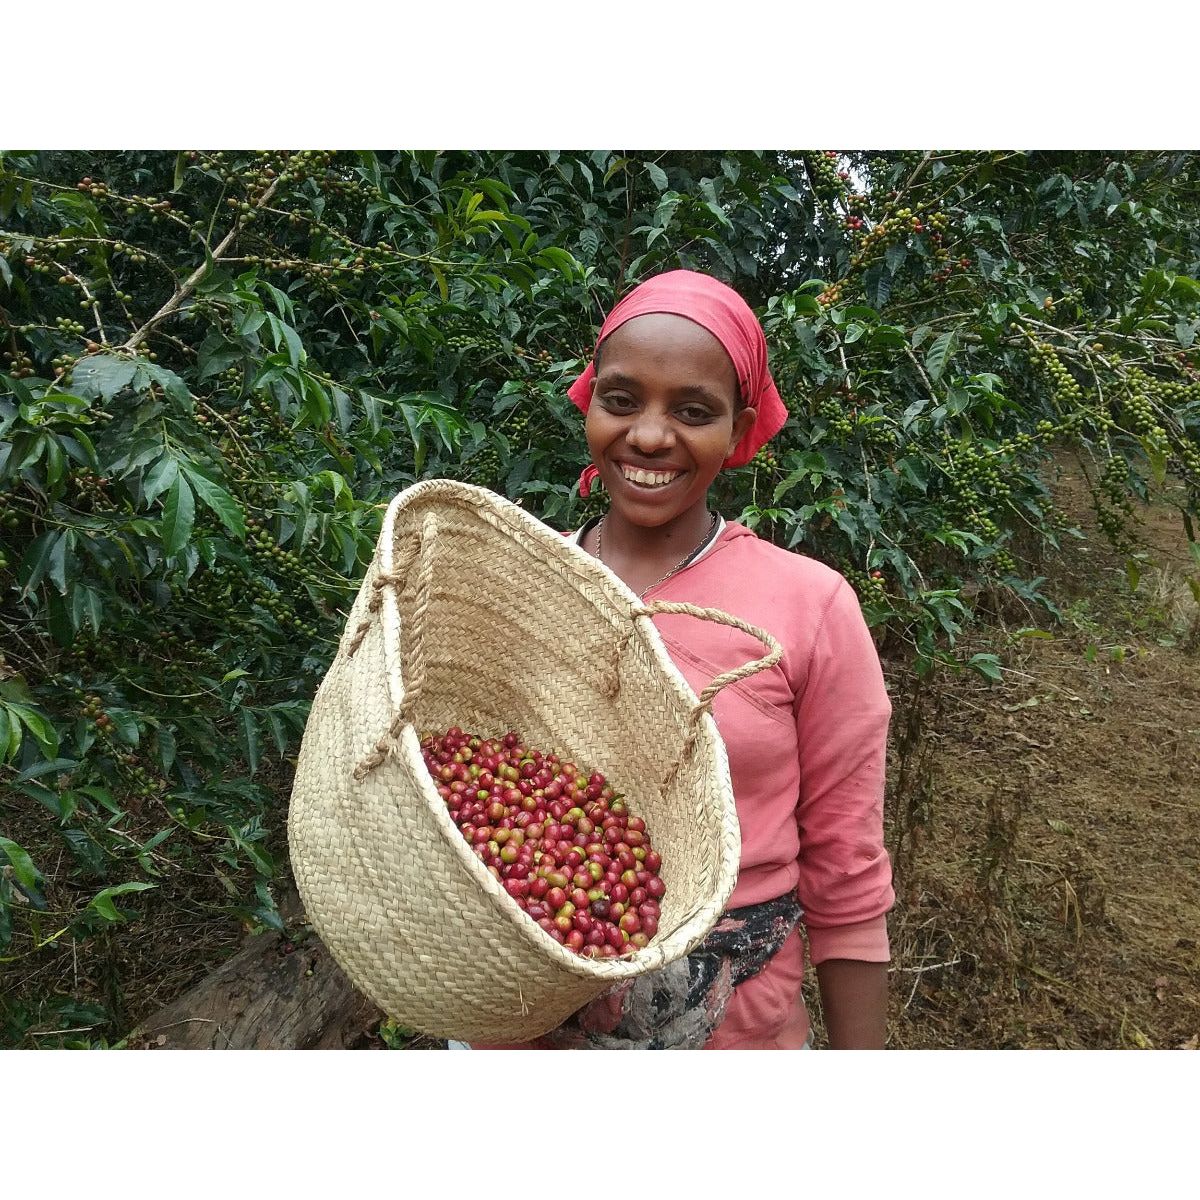 abba-olly-ethiopia-specialty-coffee-coffee-picker